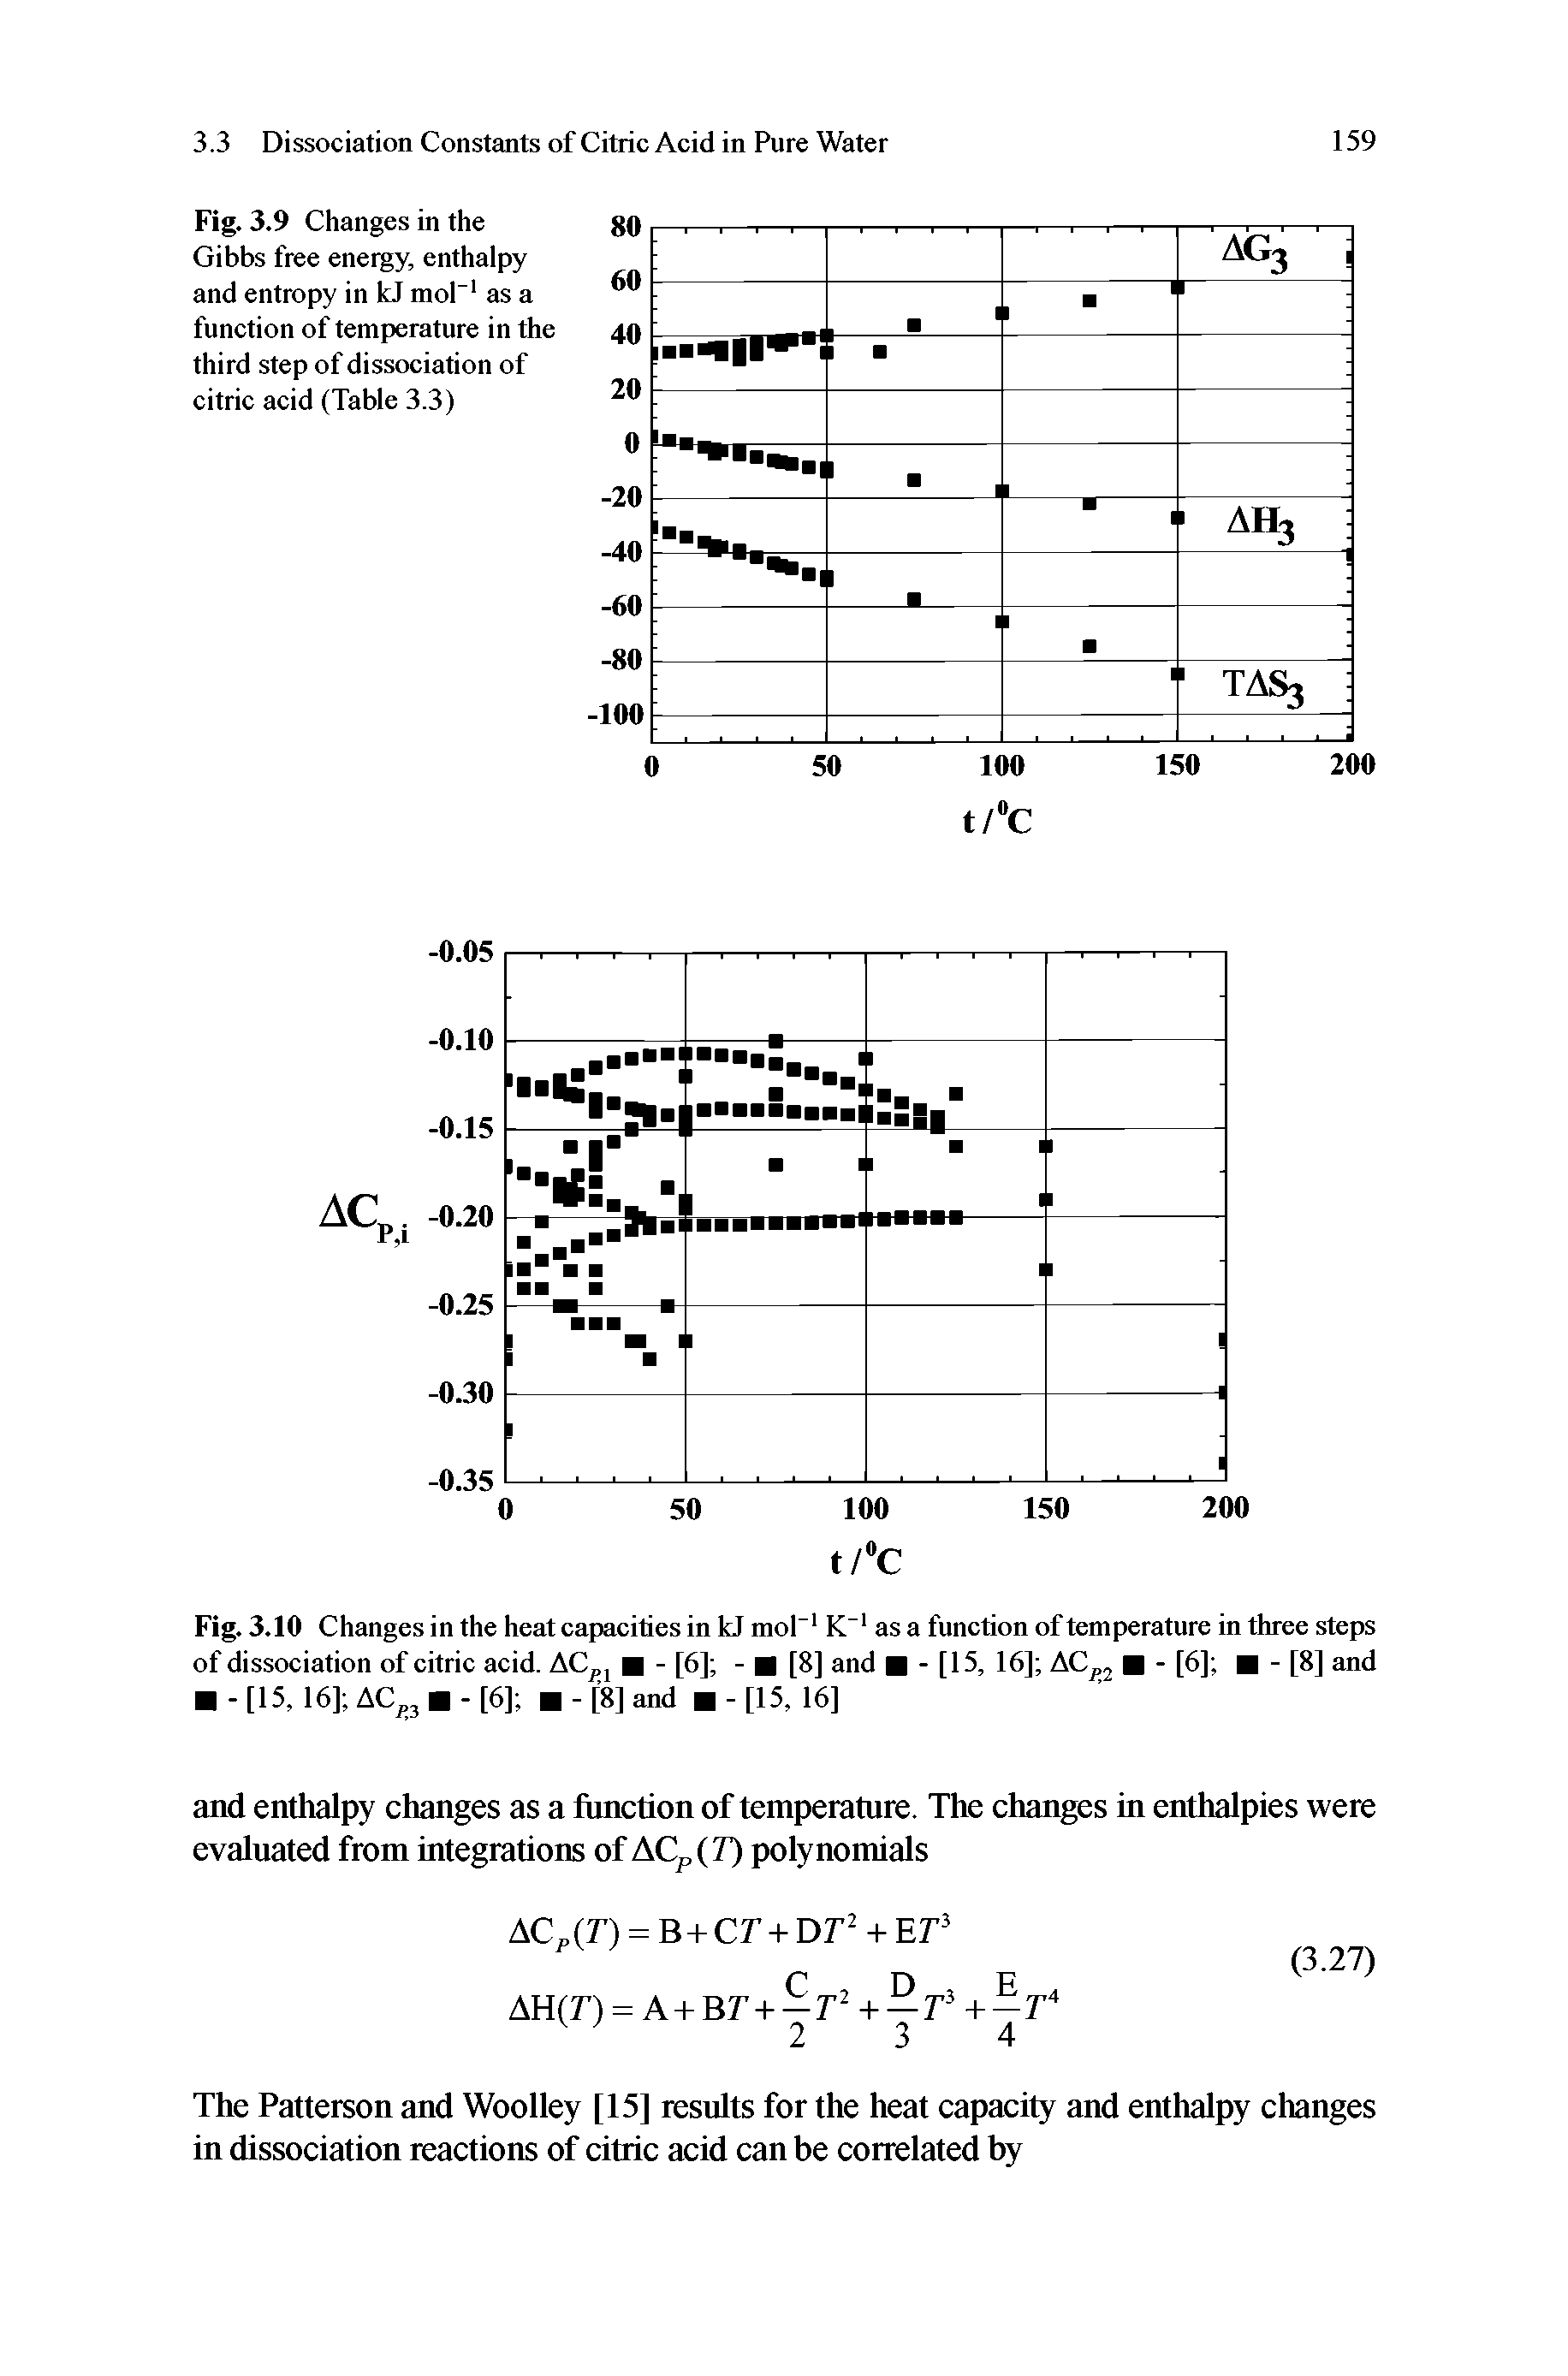 Fig. 3.9 Changes in the Gibbs free eneigy, enthalpy and entropy in kJ mol" as a funetion of temperature in the third step of dissociation of citric acid (Table 3.3)...